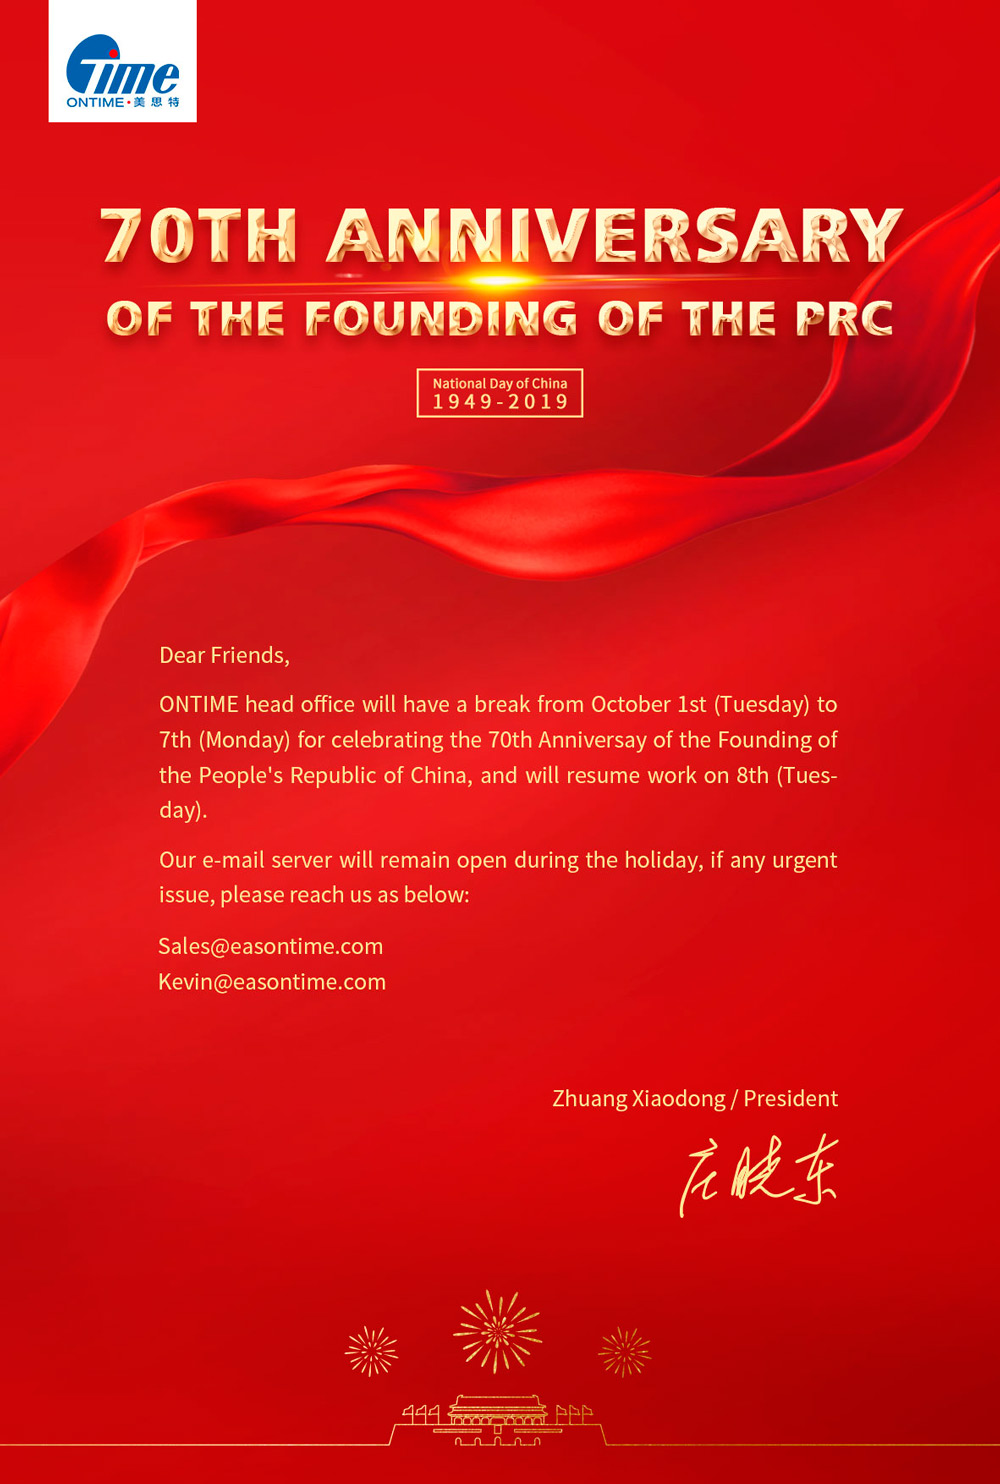 70th Anniversary Of The Founding Of The PRC